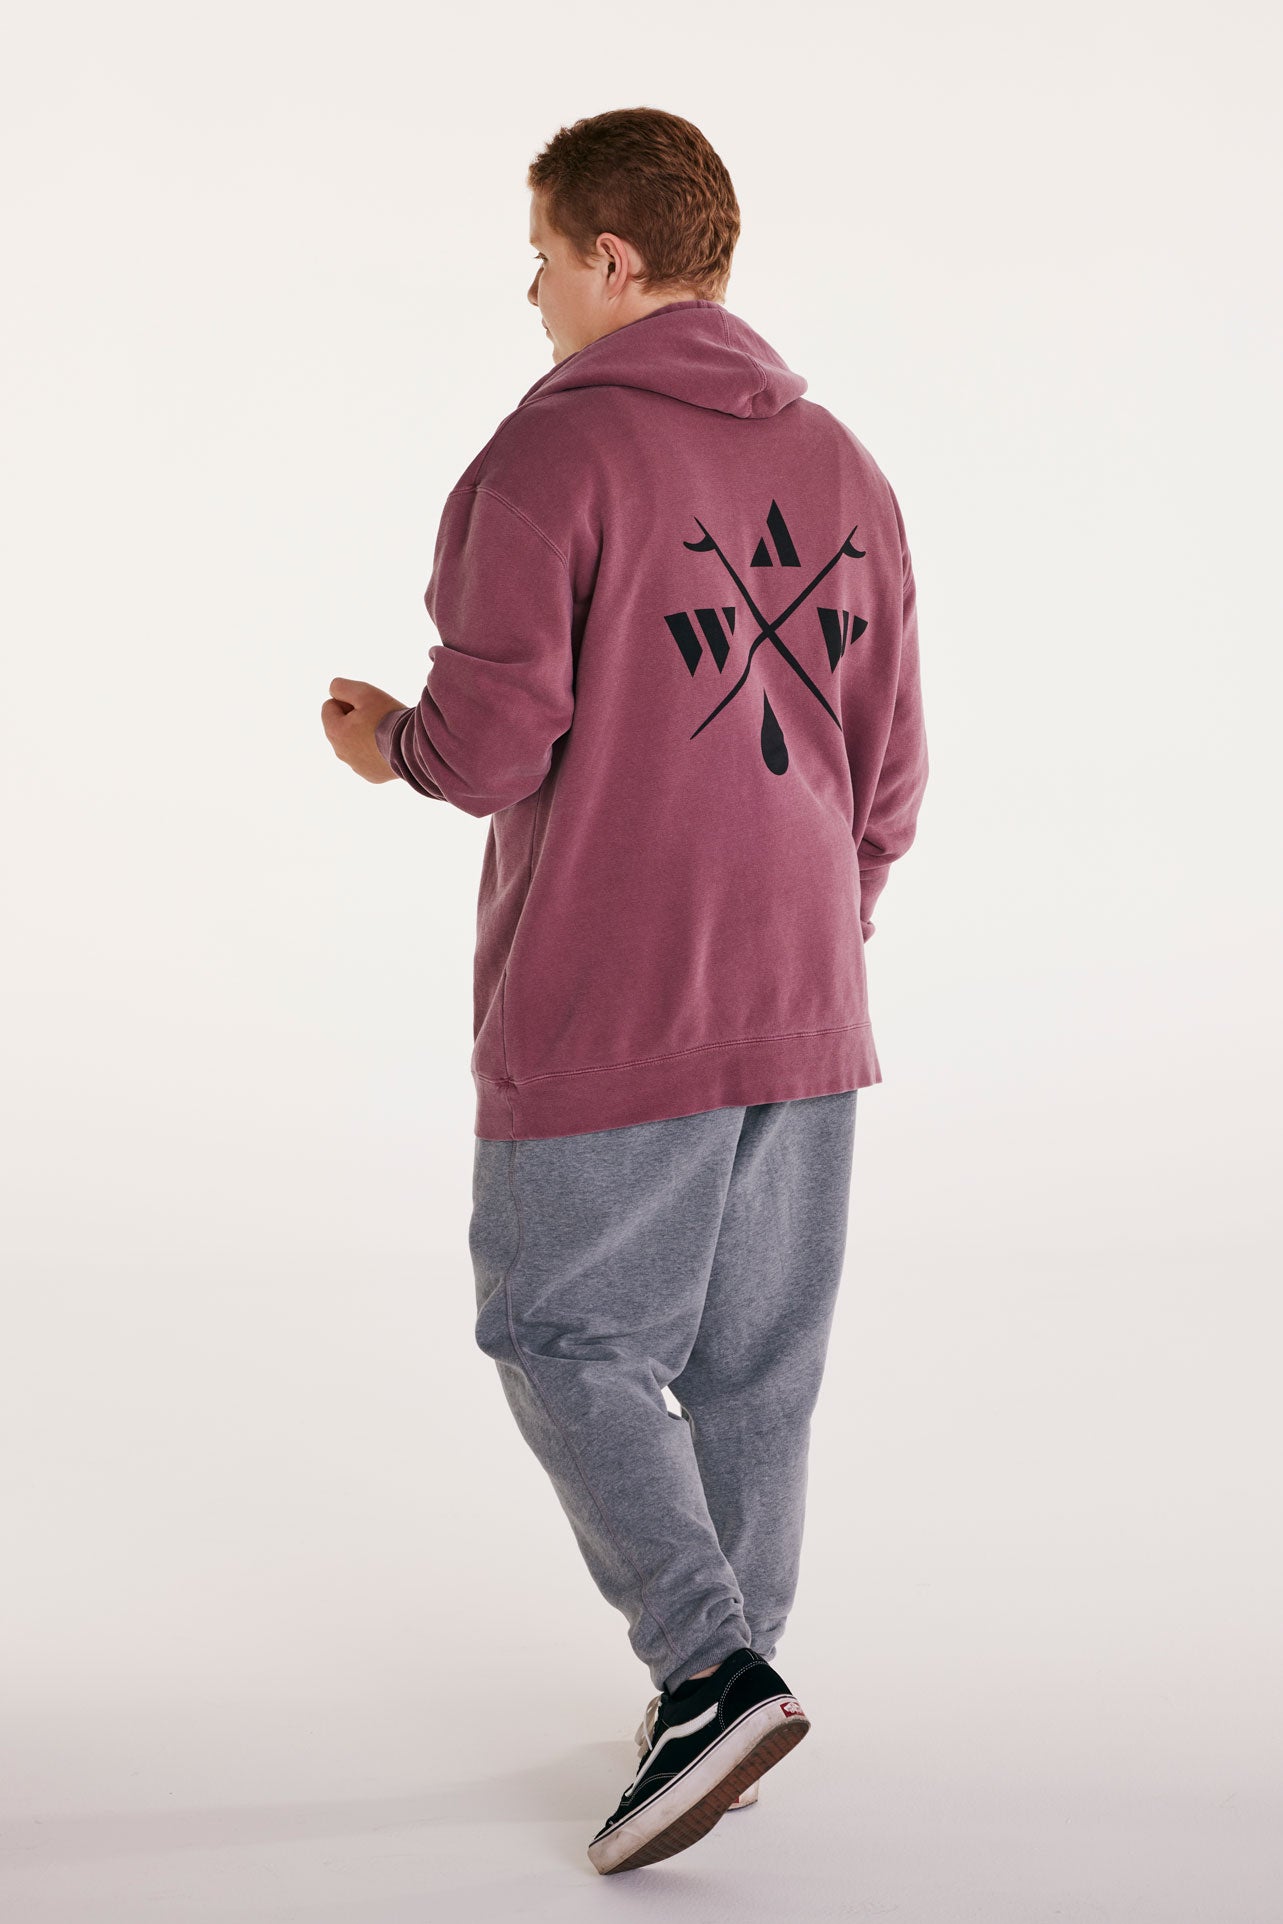 AWOW YOUTH STAMP HOODIE